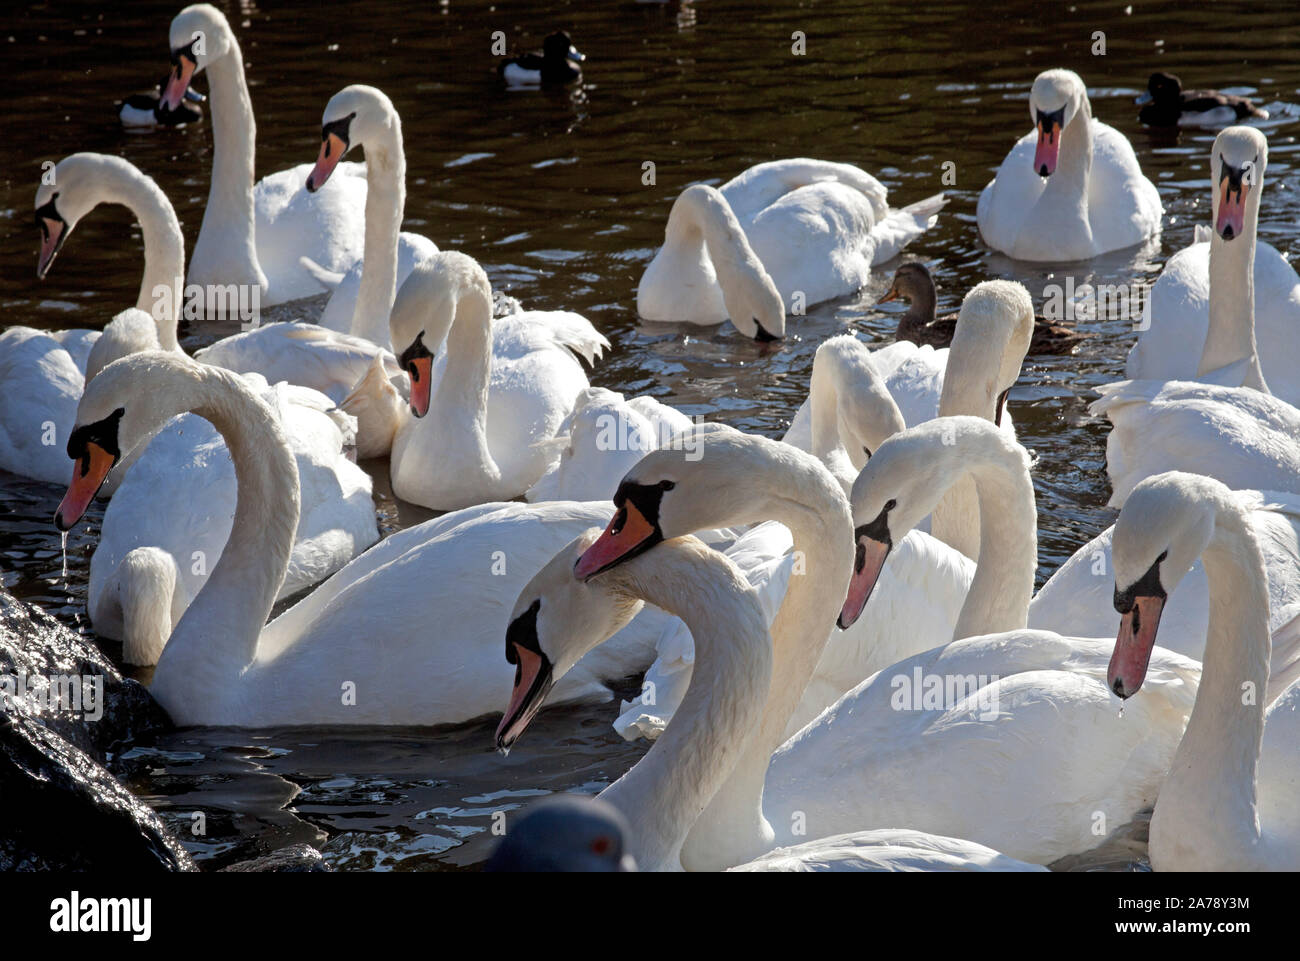 St Margarets Loch, Edinburgh, Scotland. 31st October 2019. UK weather, in this cold weather of 6 degrees the Queen's Mute swans and others appreciate supplementary beneficial feeding of grain and vegetables in Holyrood Park. Park Rangers warn against feeding just white bread as it is claimed to have no nutritional value and it can cause arthritis and birth defects. Stock Photo